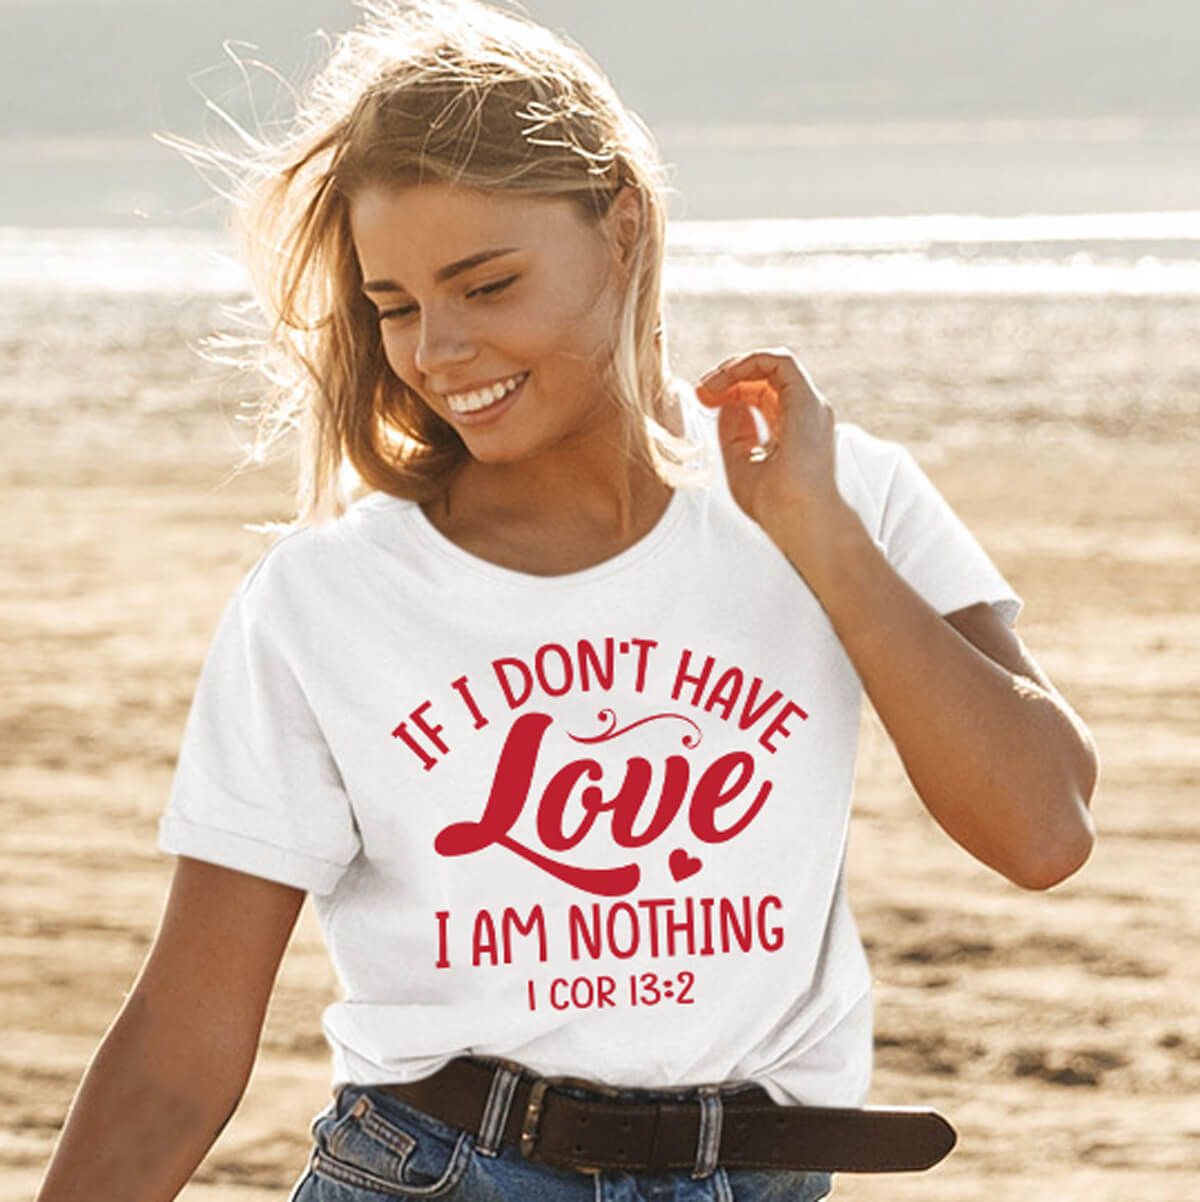 If I Don't Have Love I Am Nothing T-Shirt